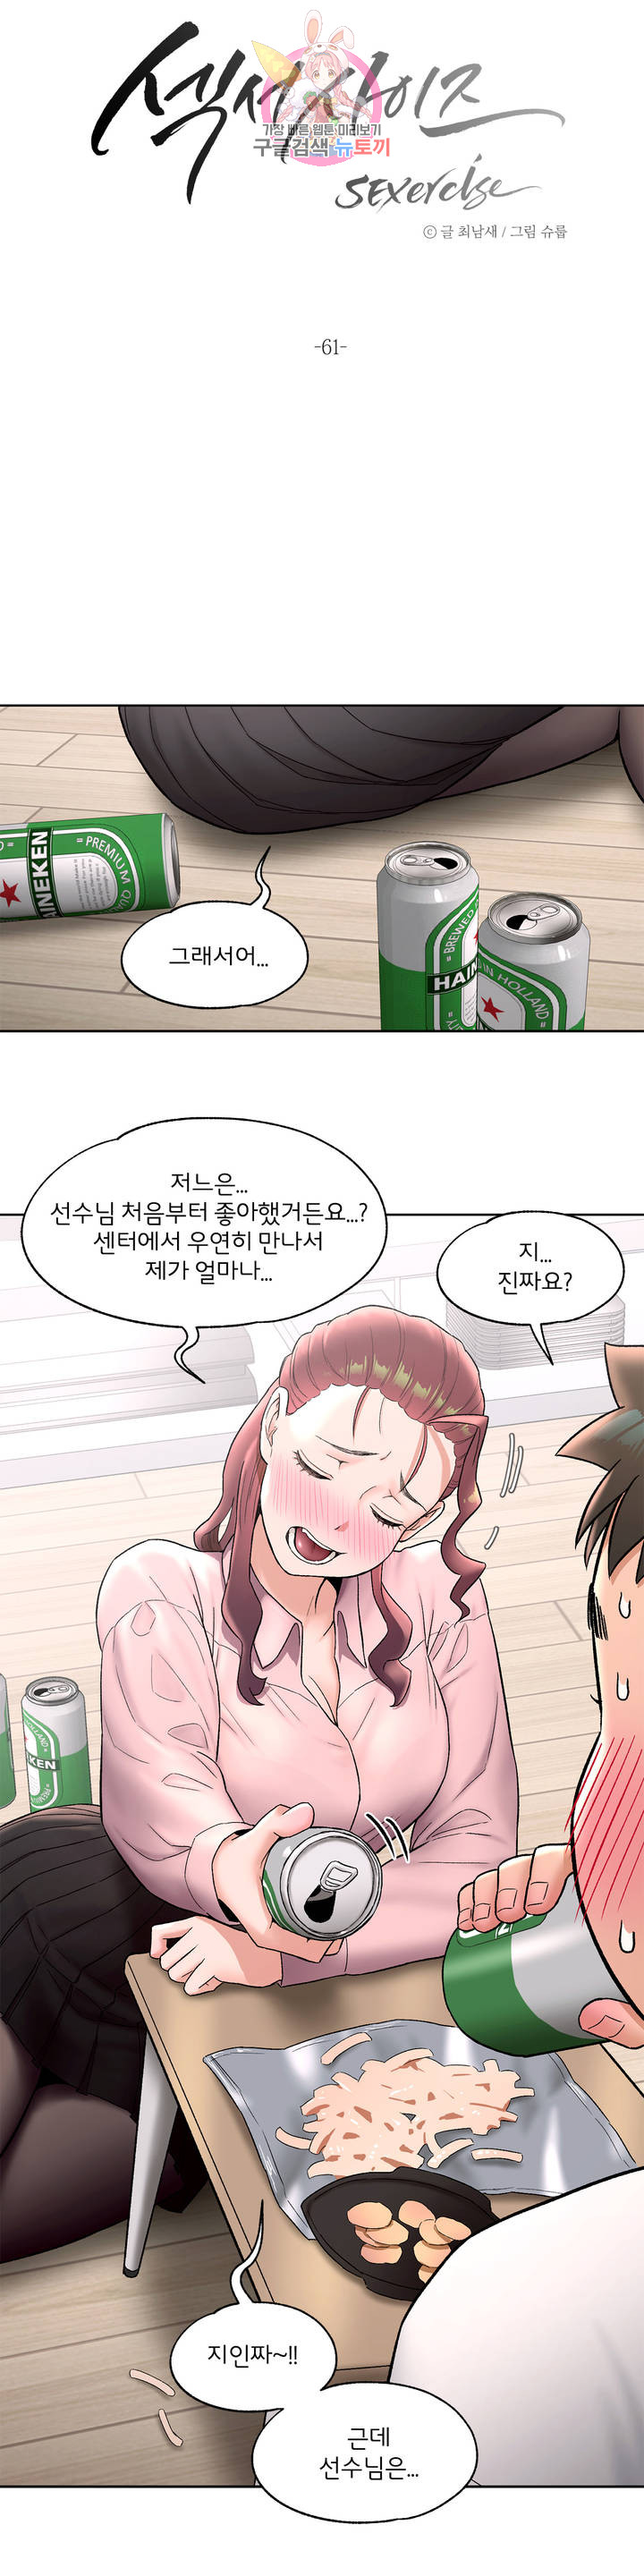 Sex Exercice Season 02 Raw - Chapter 61 Page 4